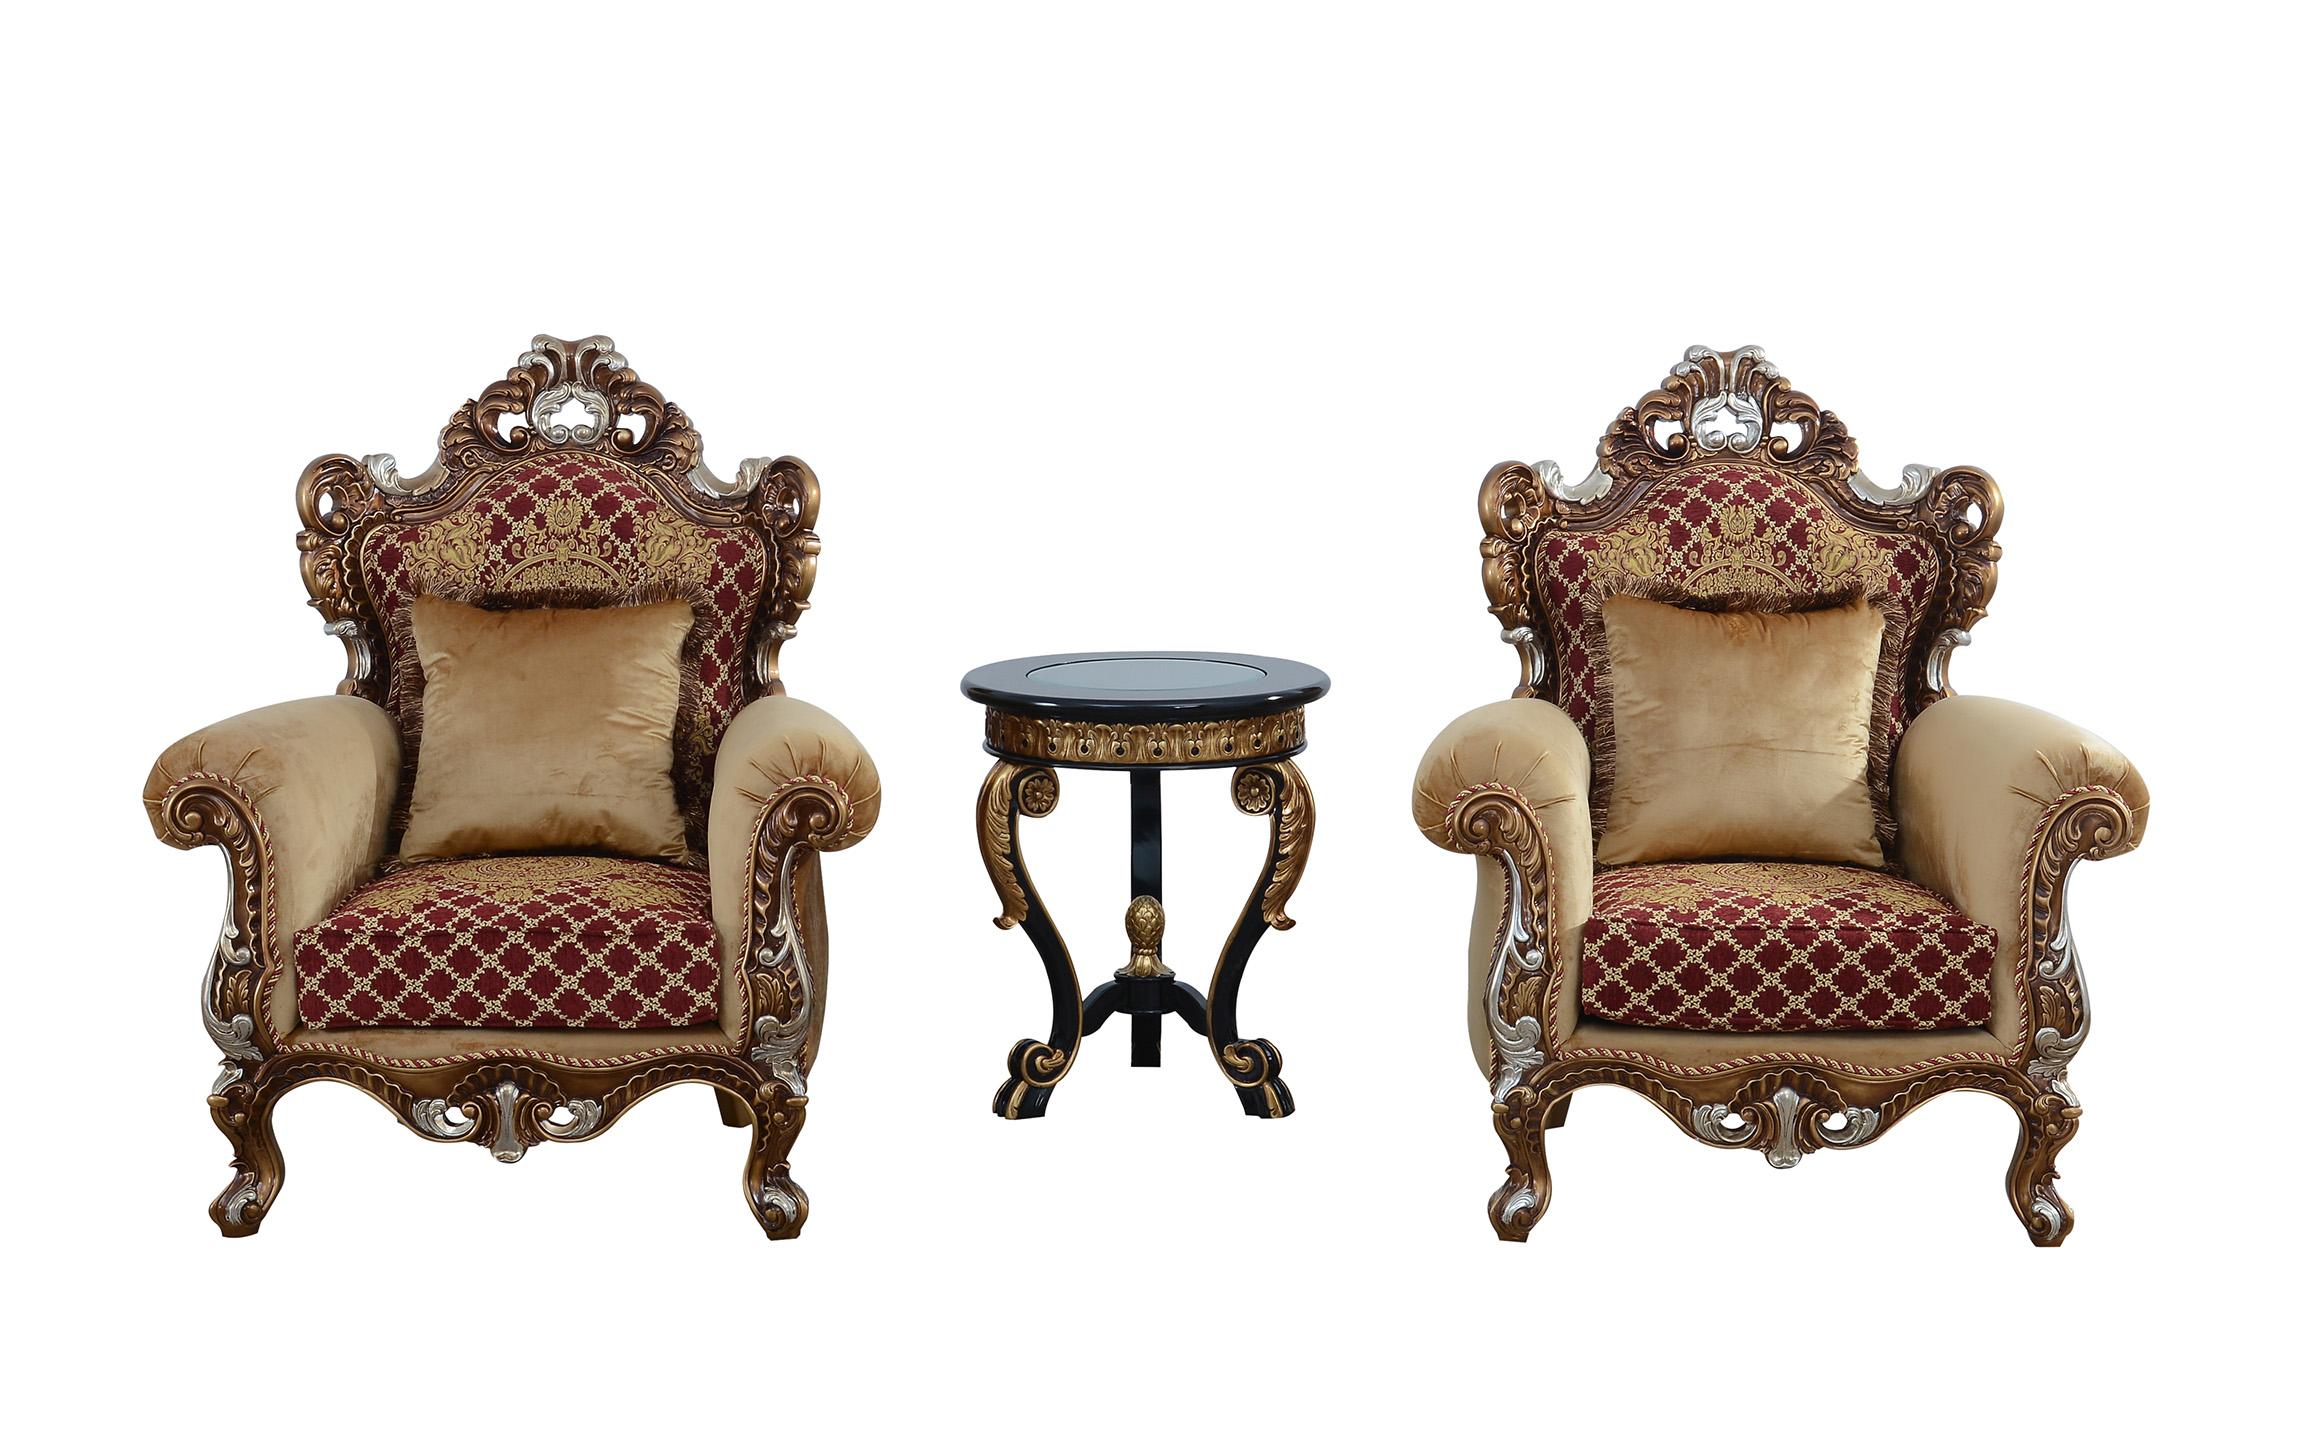 Classic, Traditional Arm Chair Set EMPERADOR III 42036-C-Set-2 in Red, Gold Fabric